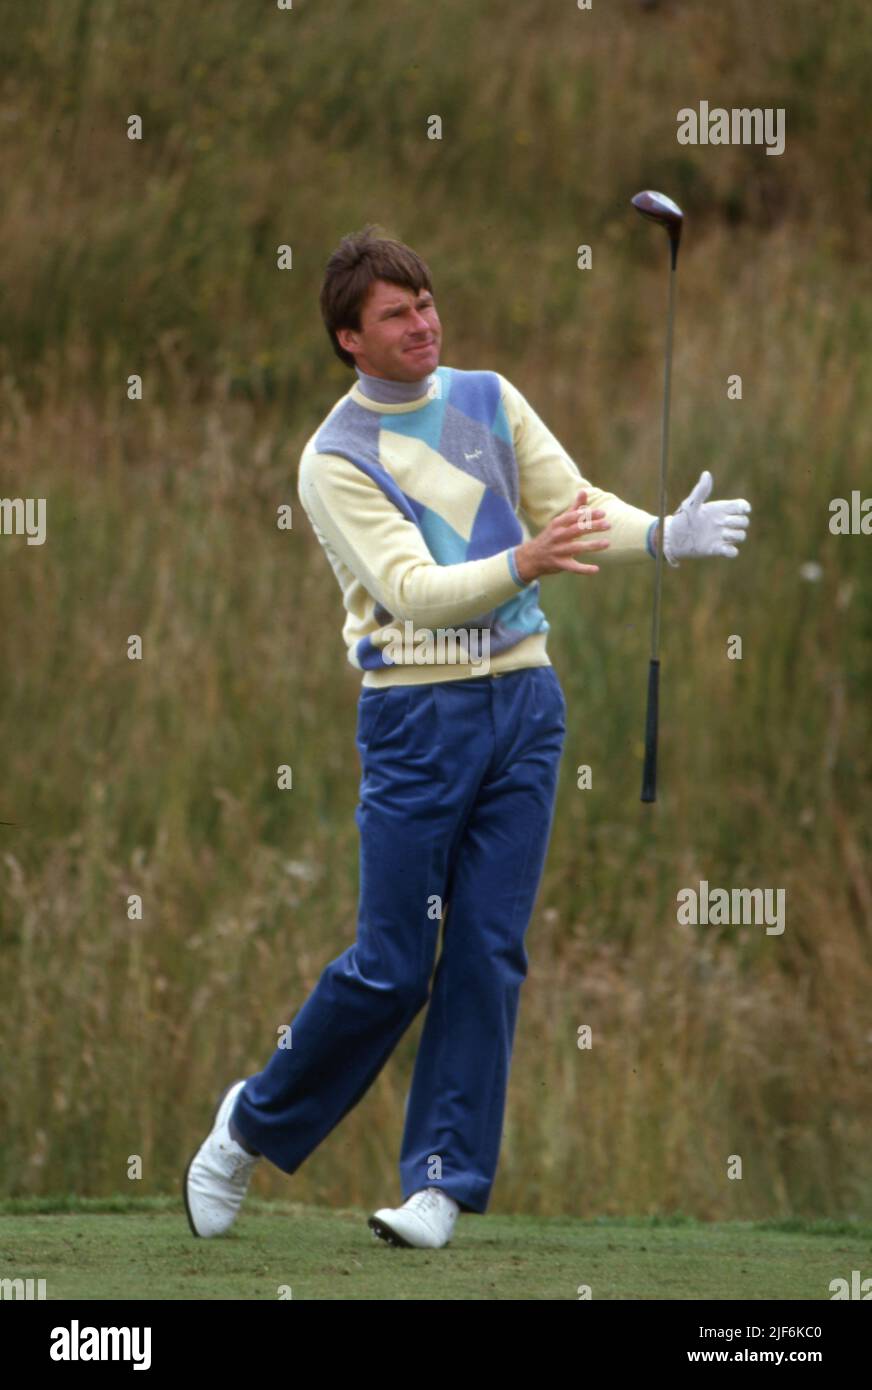 Nick Faldo Golfer ashowing his magic touch on the tee British Open 1986  Photo by Tony Henshaw Stock Photo